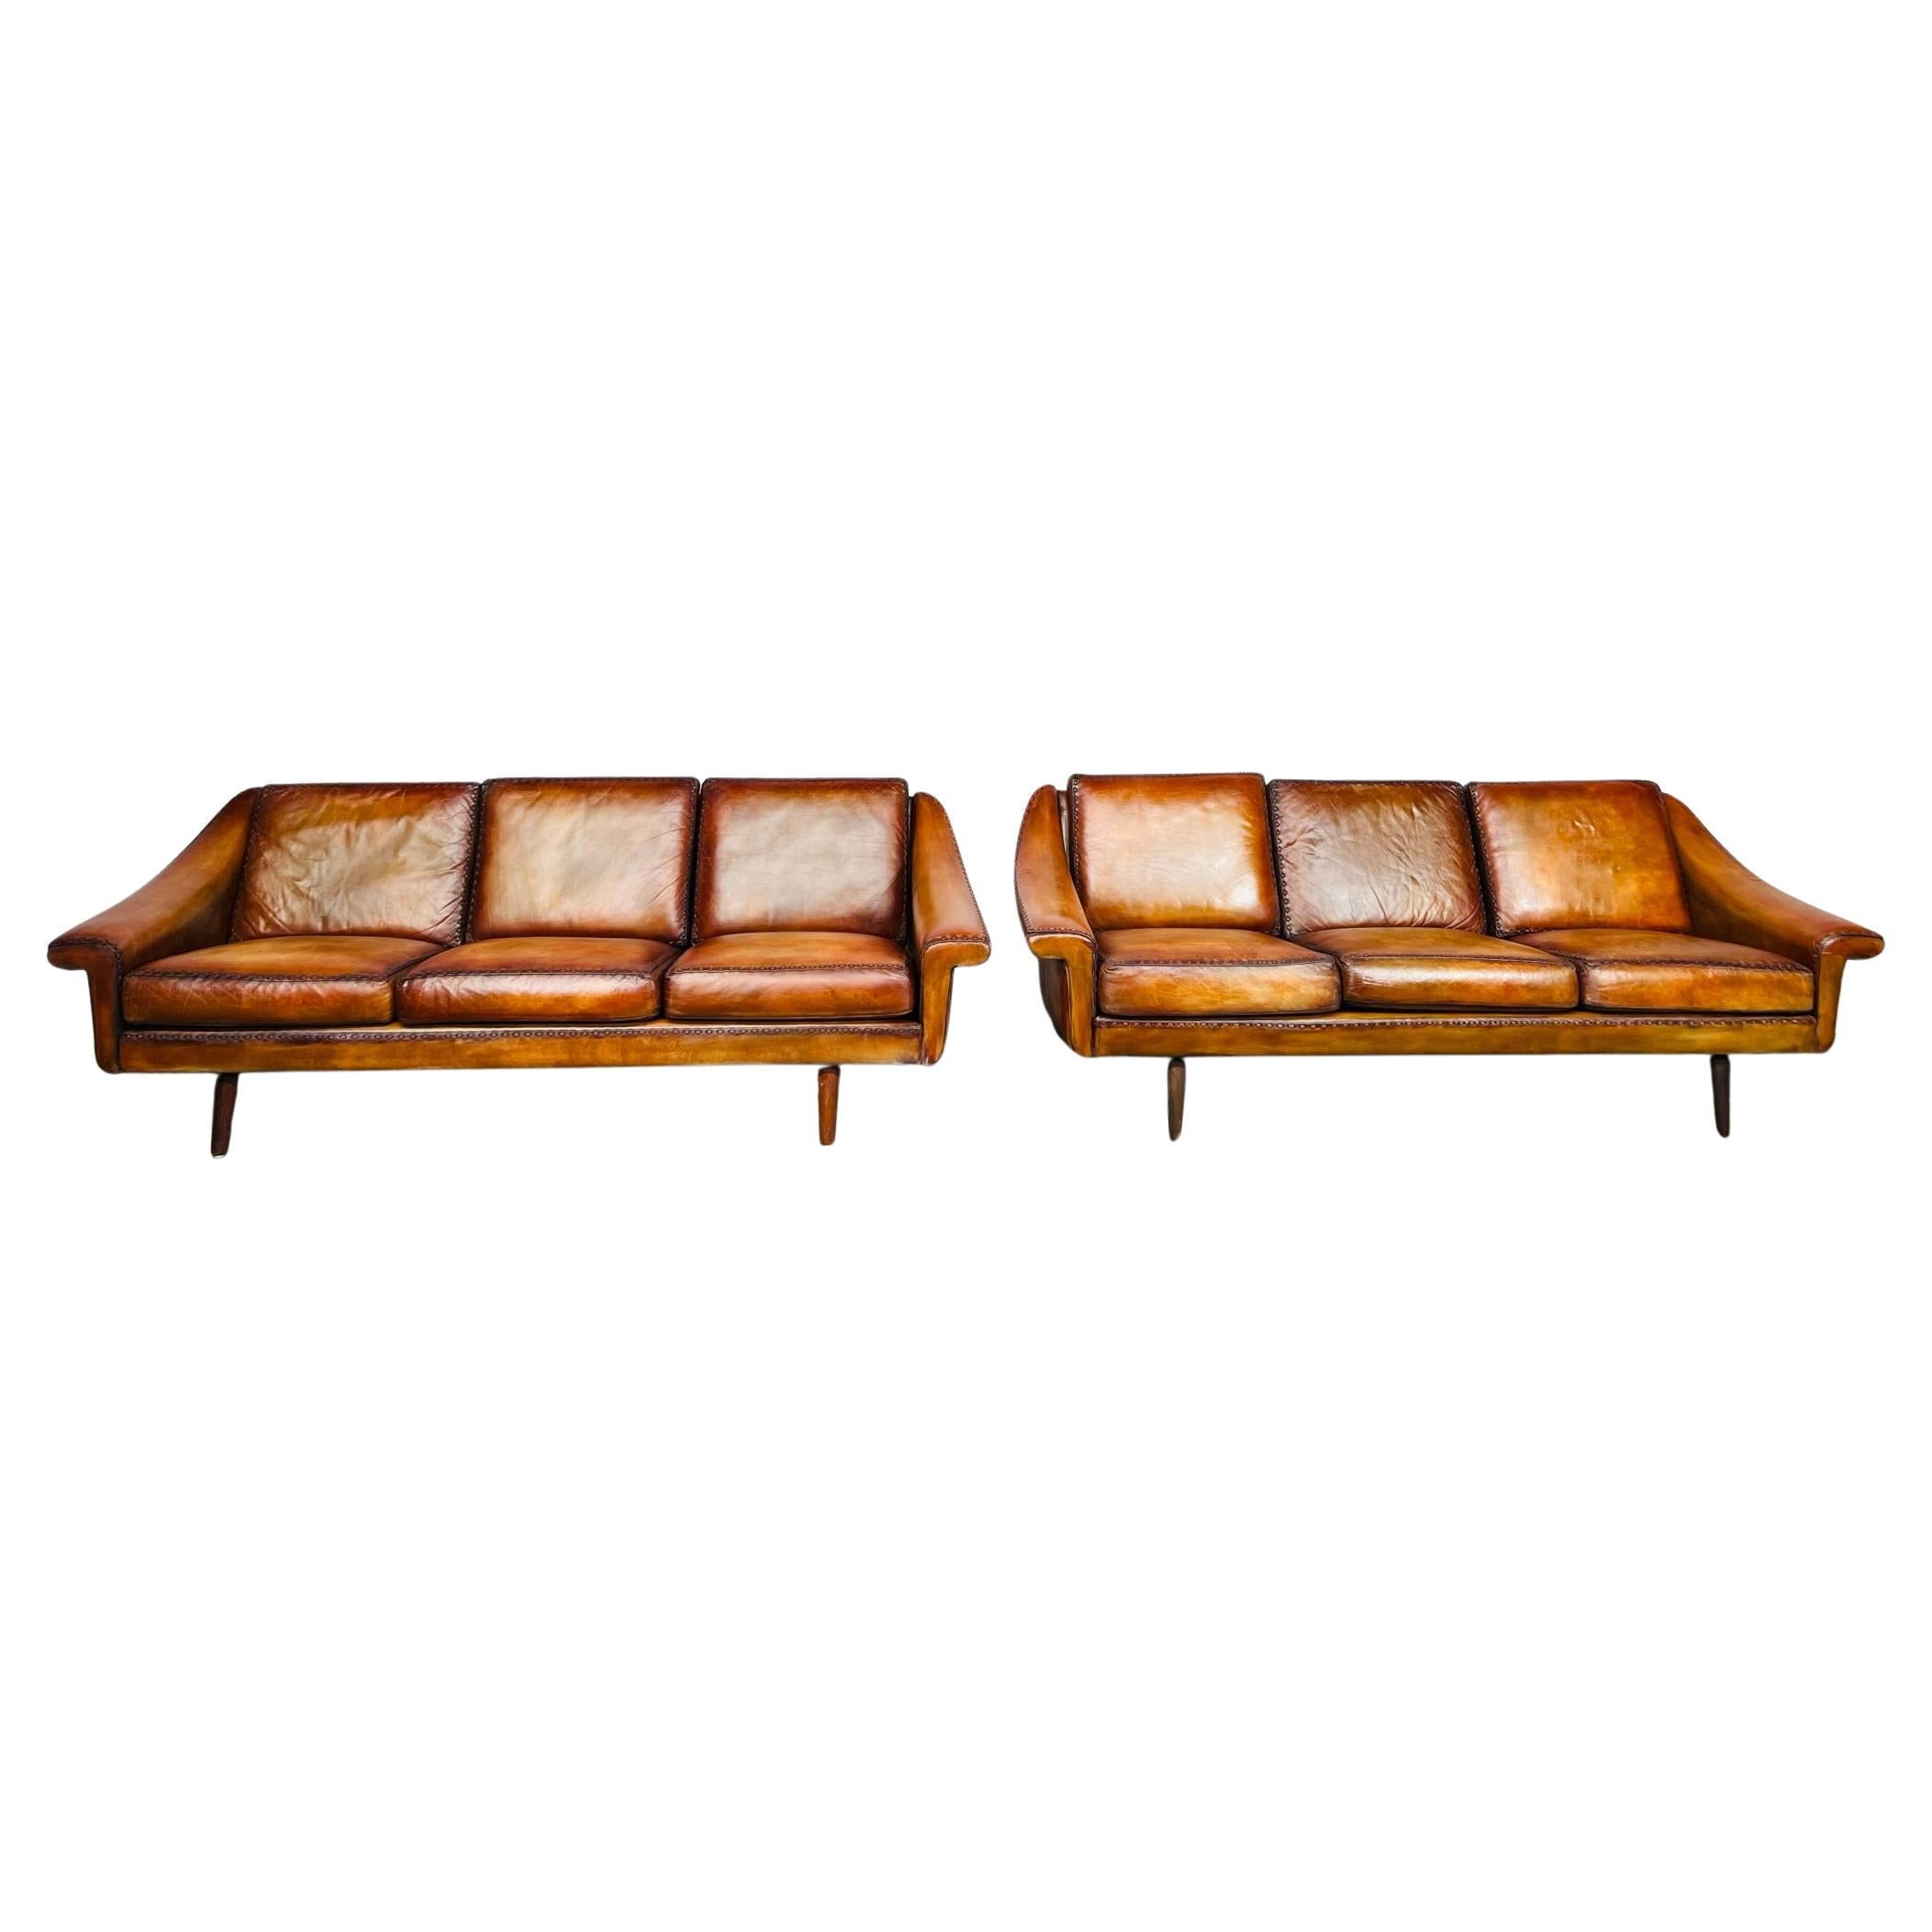 Pair Of Matador Leather 3 Seater Sofa by Aage Christiansen for Eran 1960s #642 For Sale